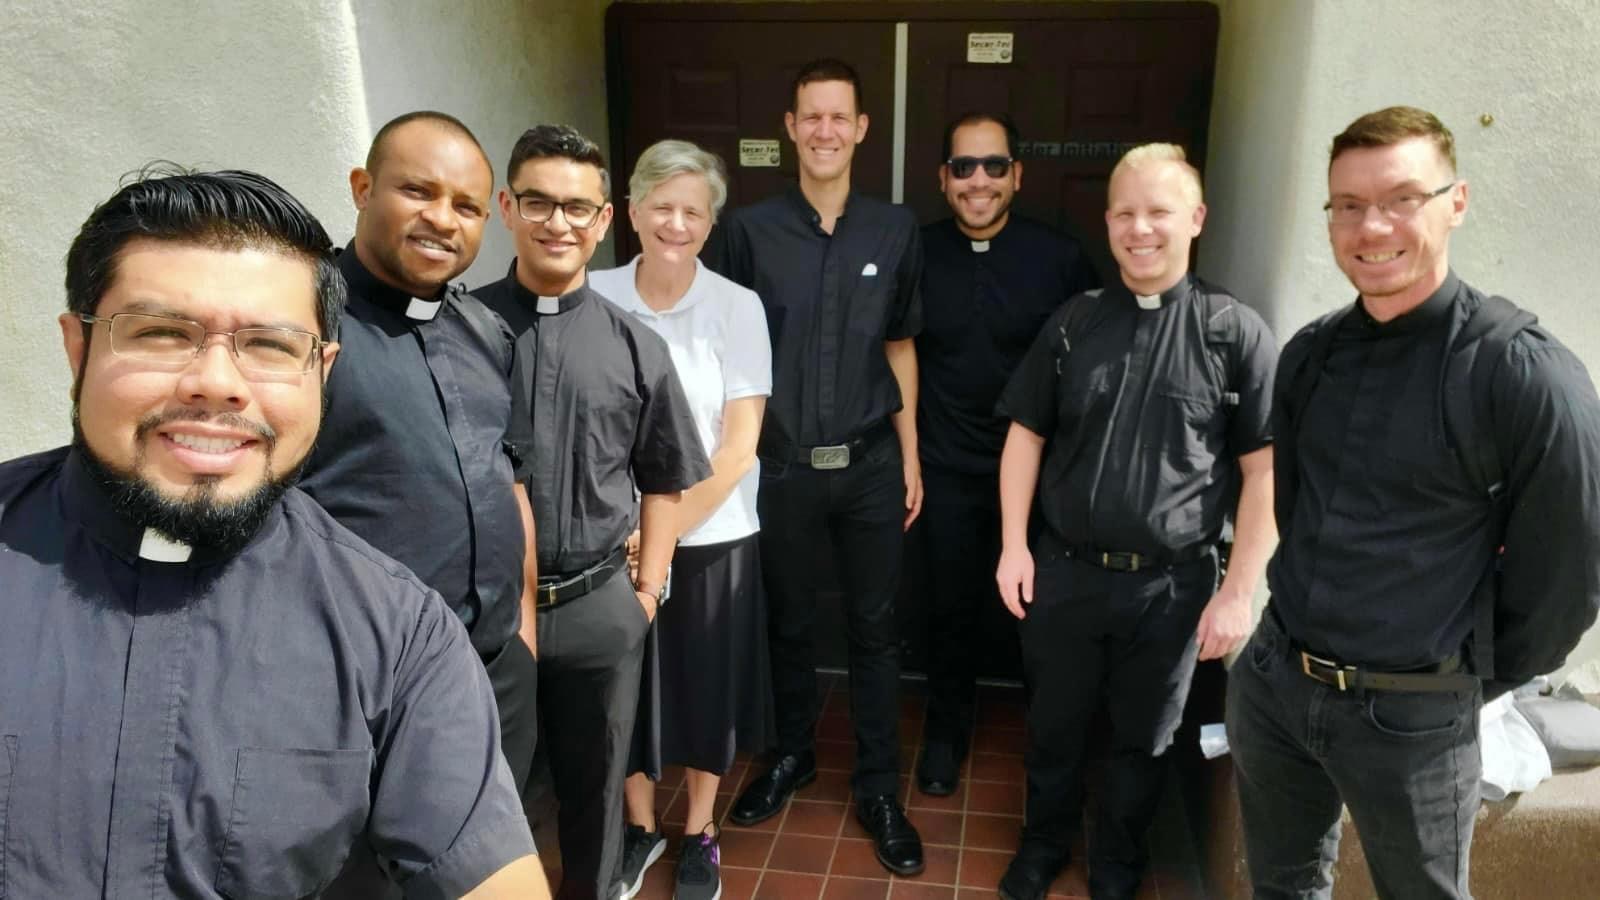 Sister Katie posing with seminarians from Mudelein Seminary